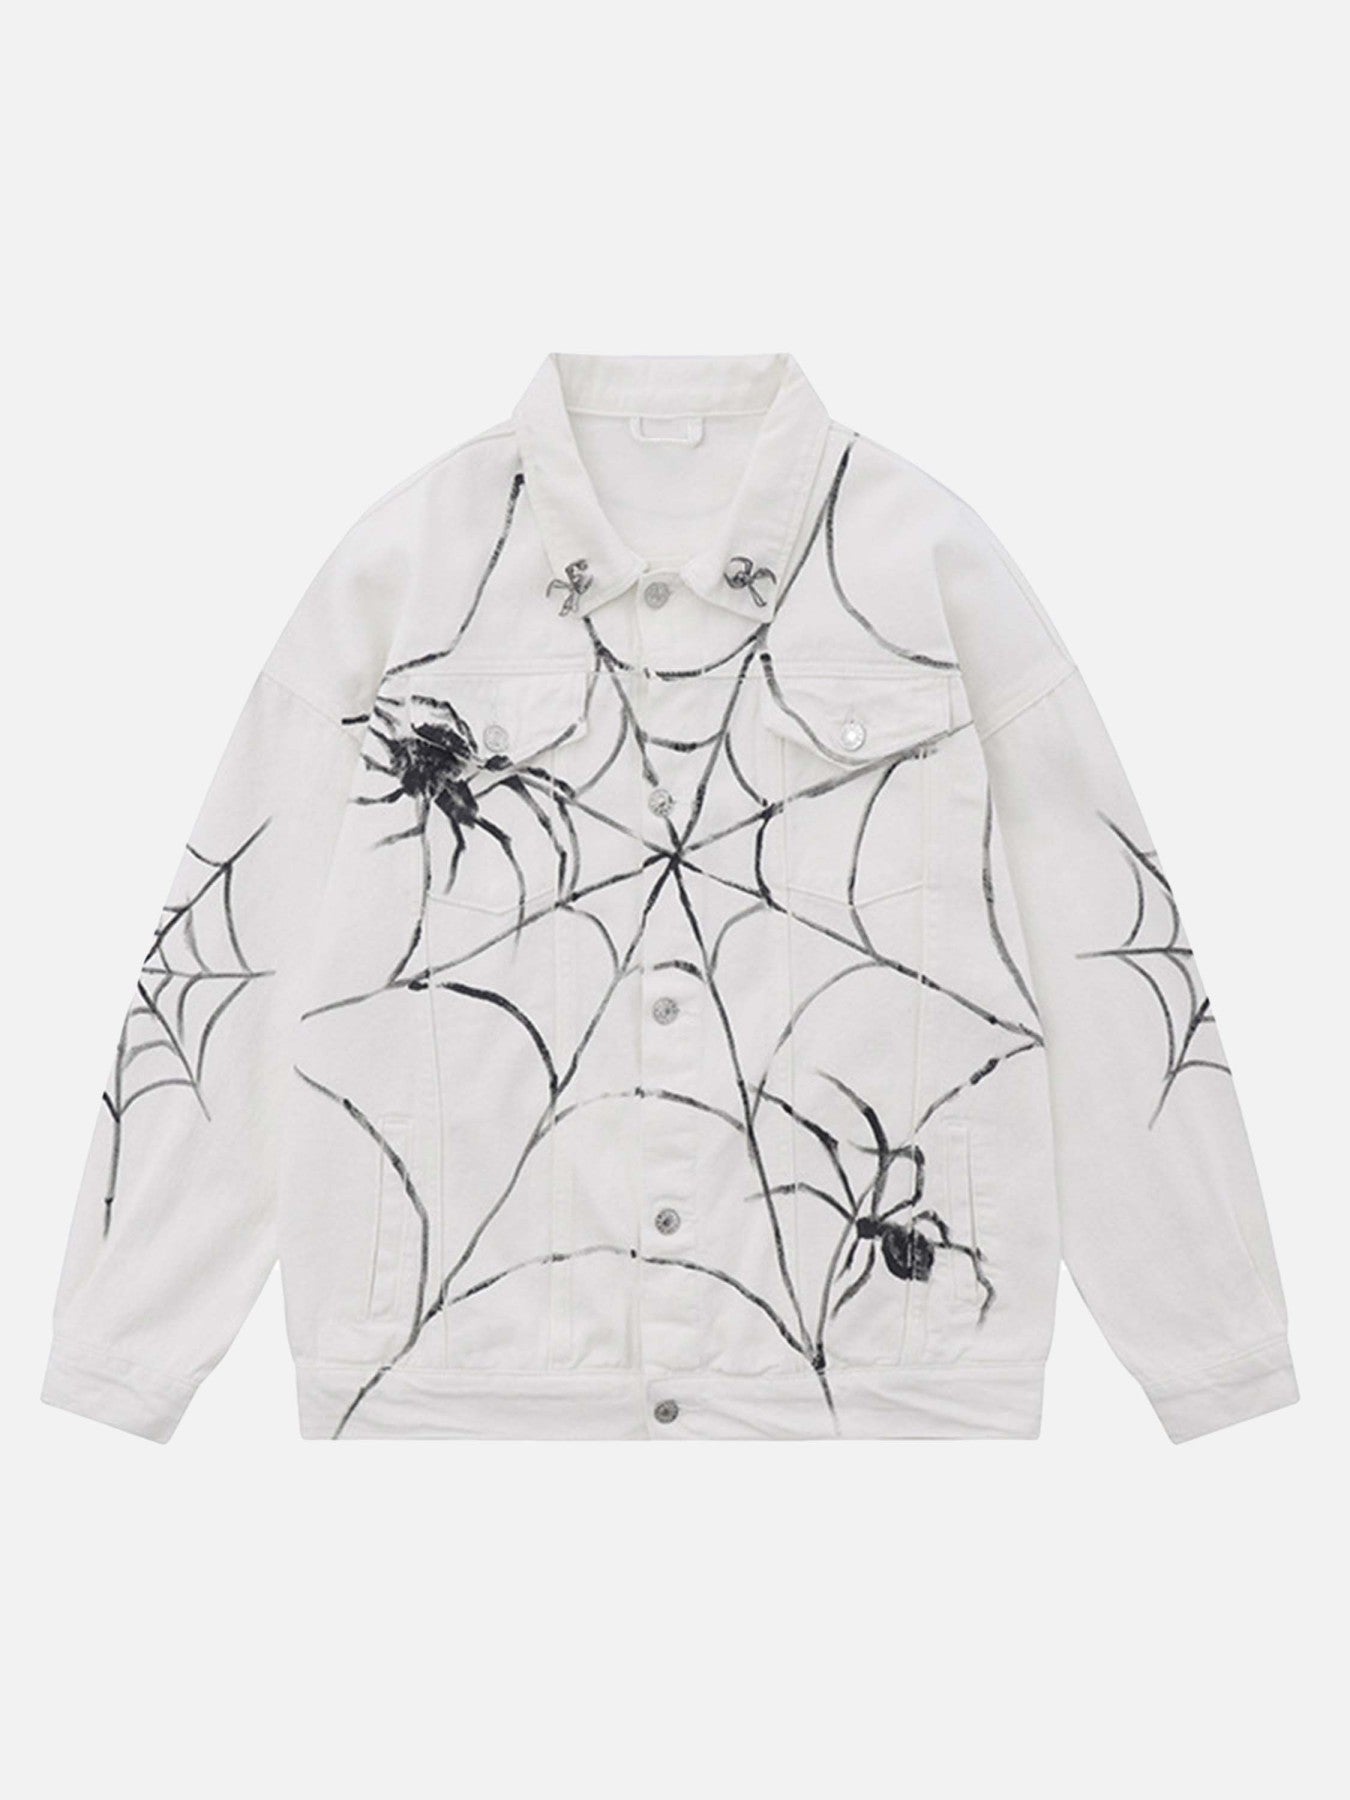 The Supermade Hand Painted Spider Denim Jacket